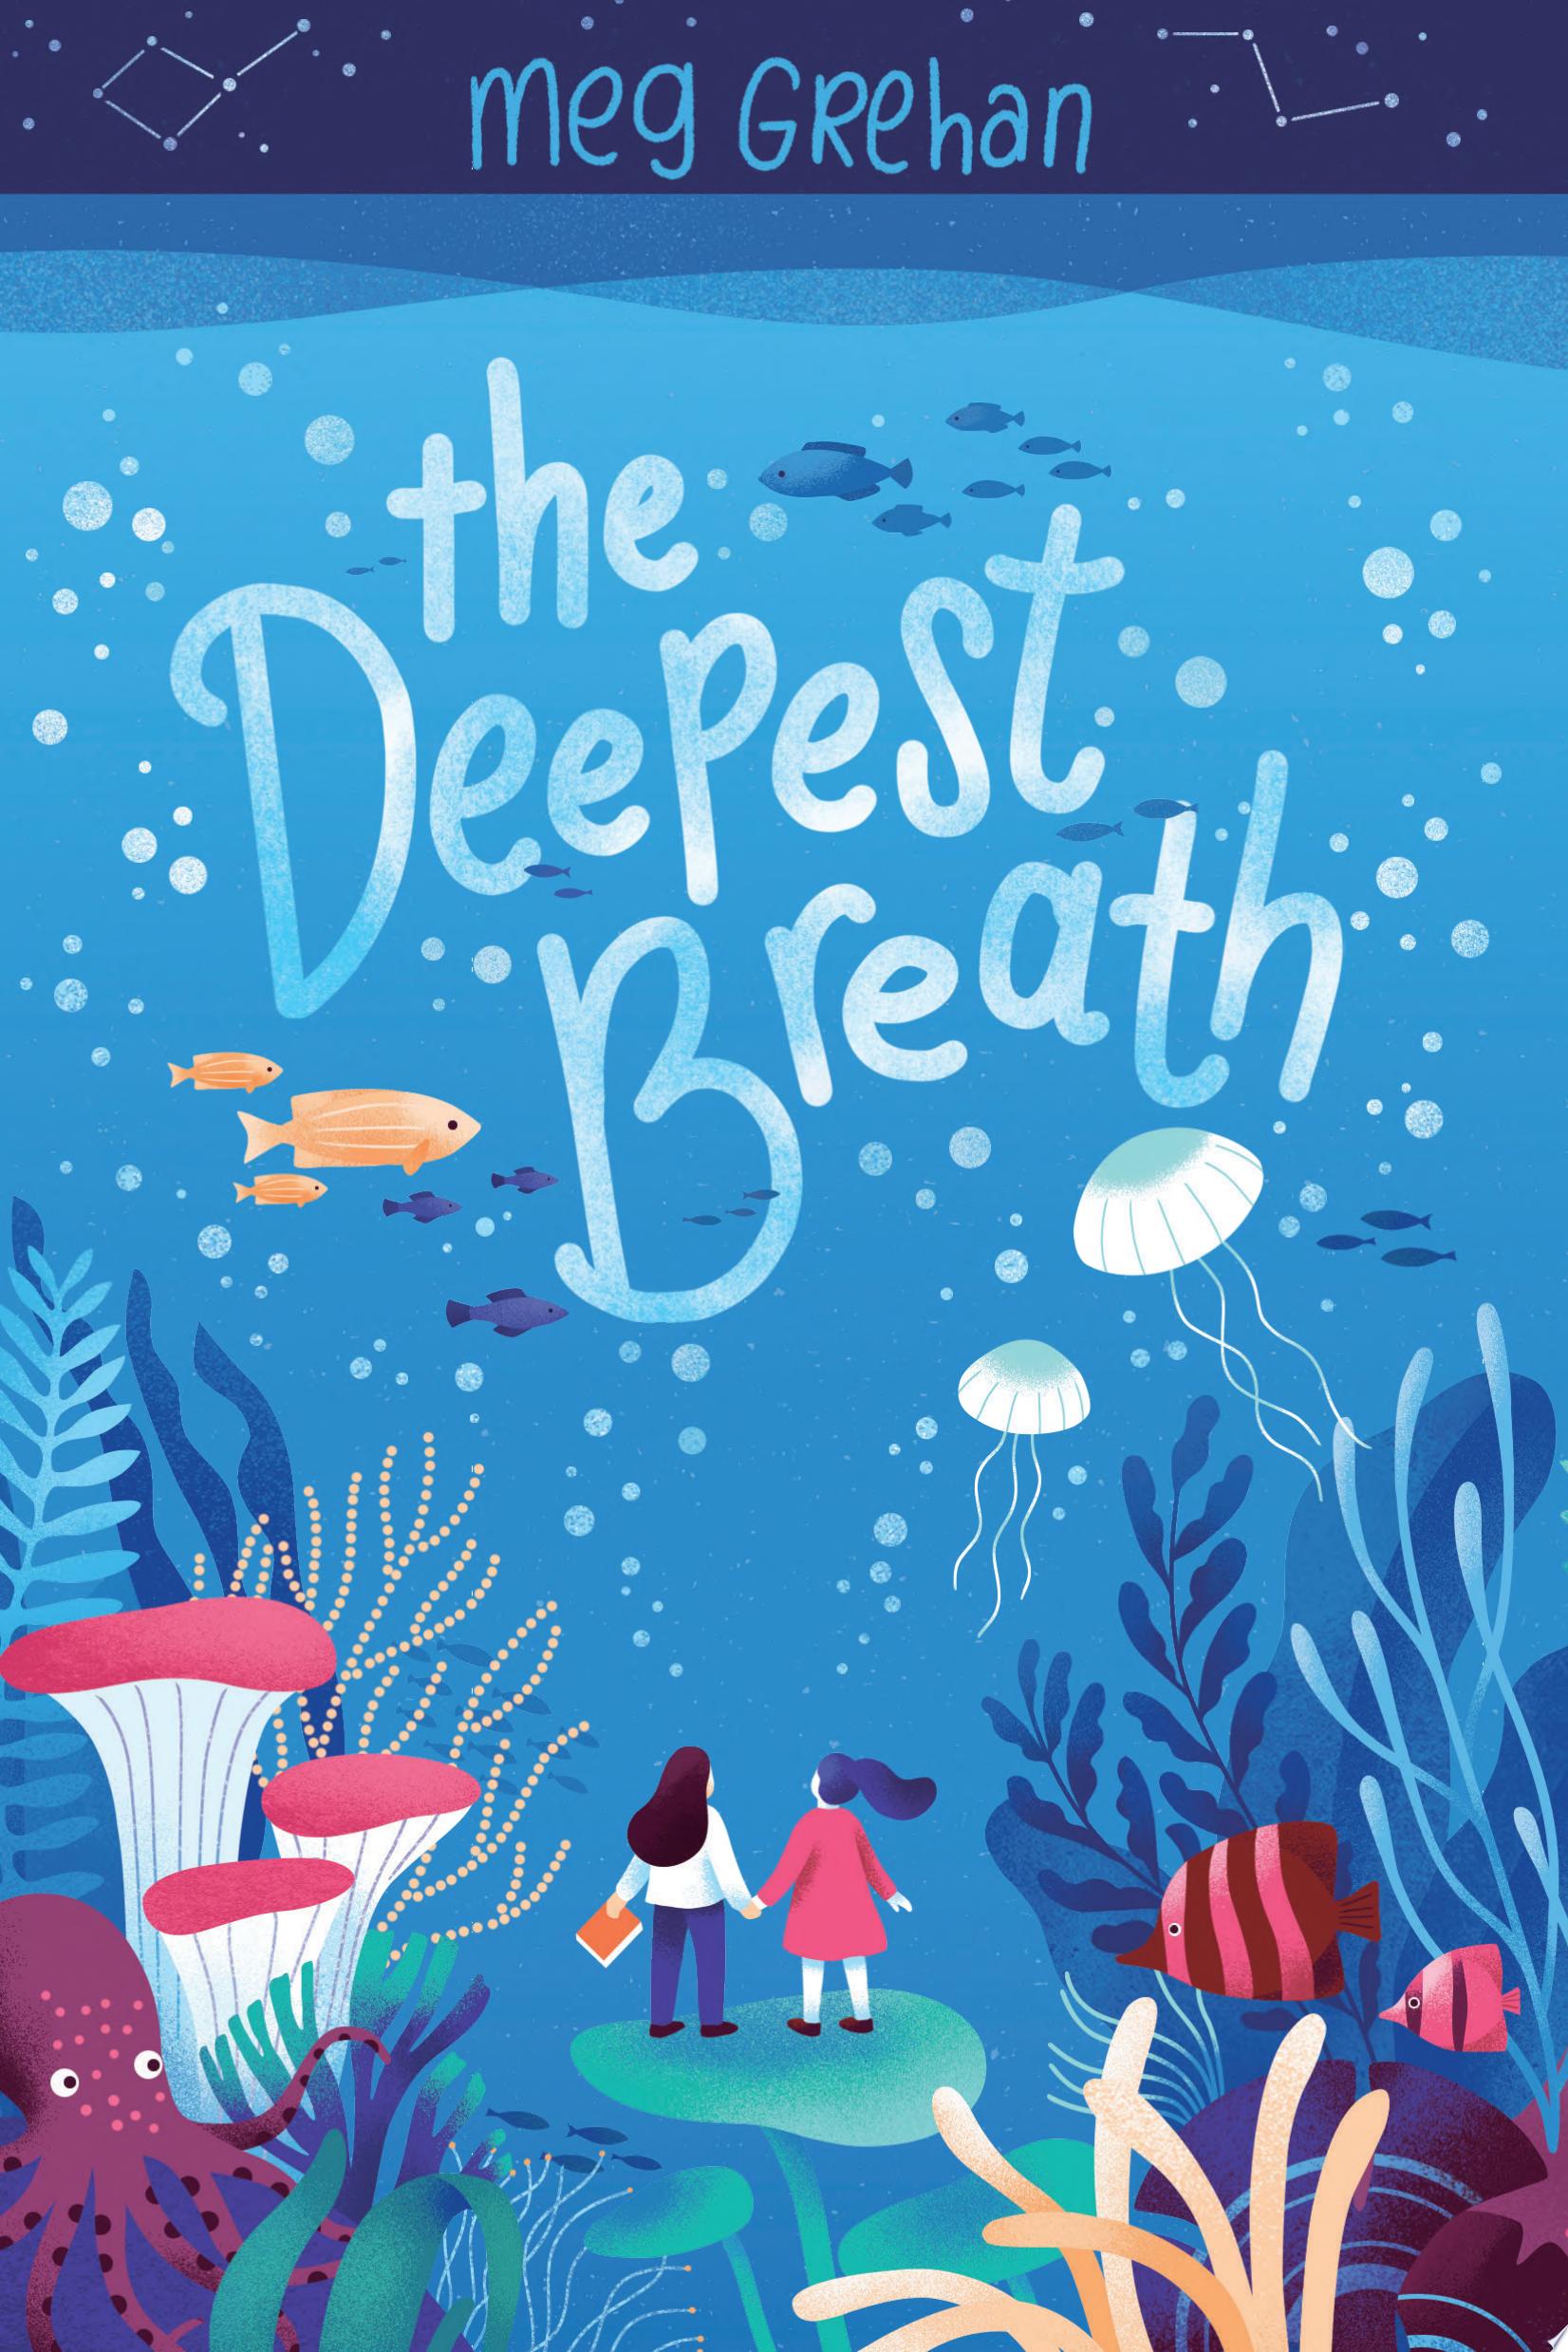 Image for "The Deepest Breath"